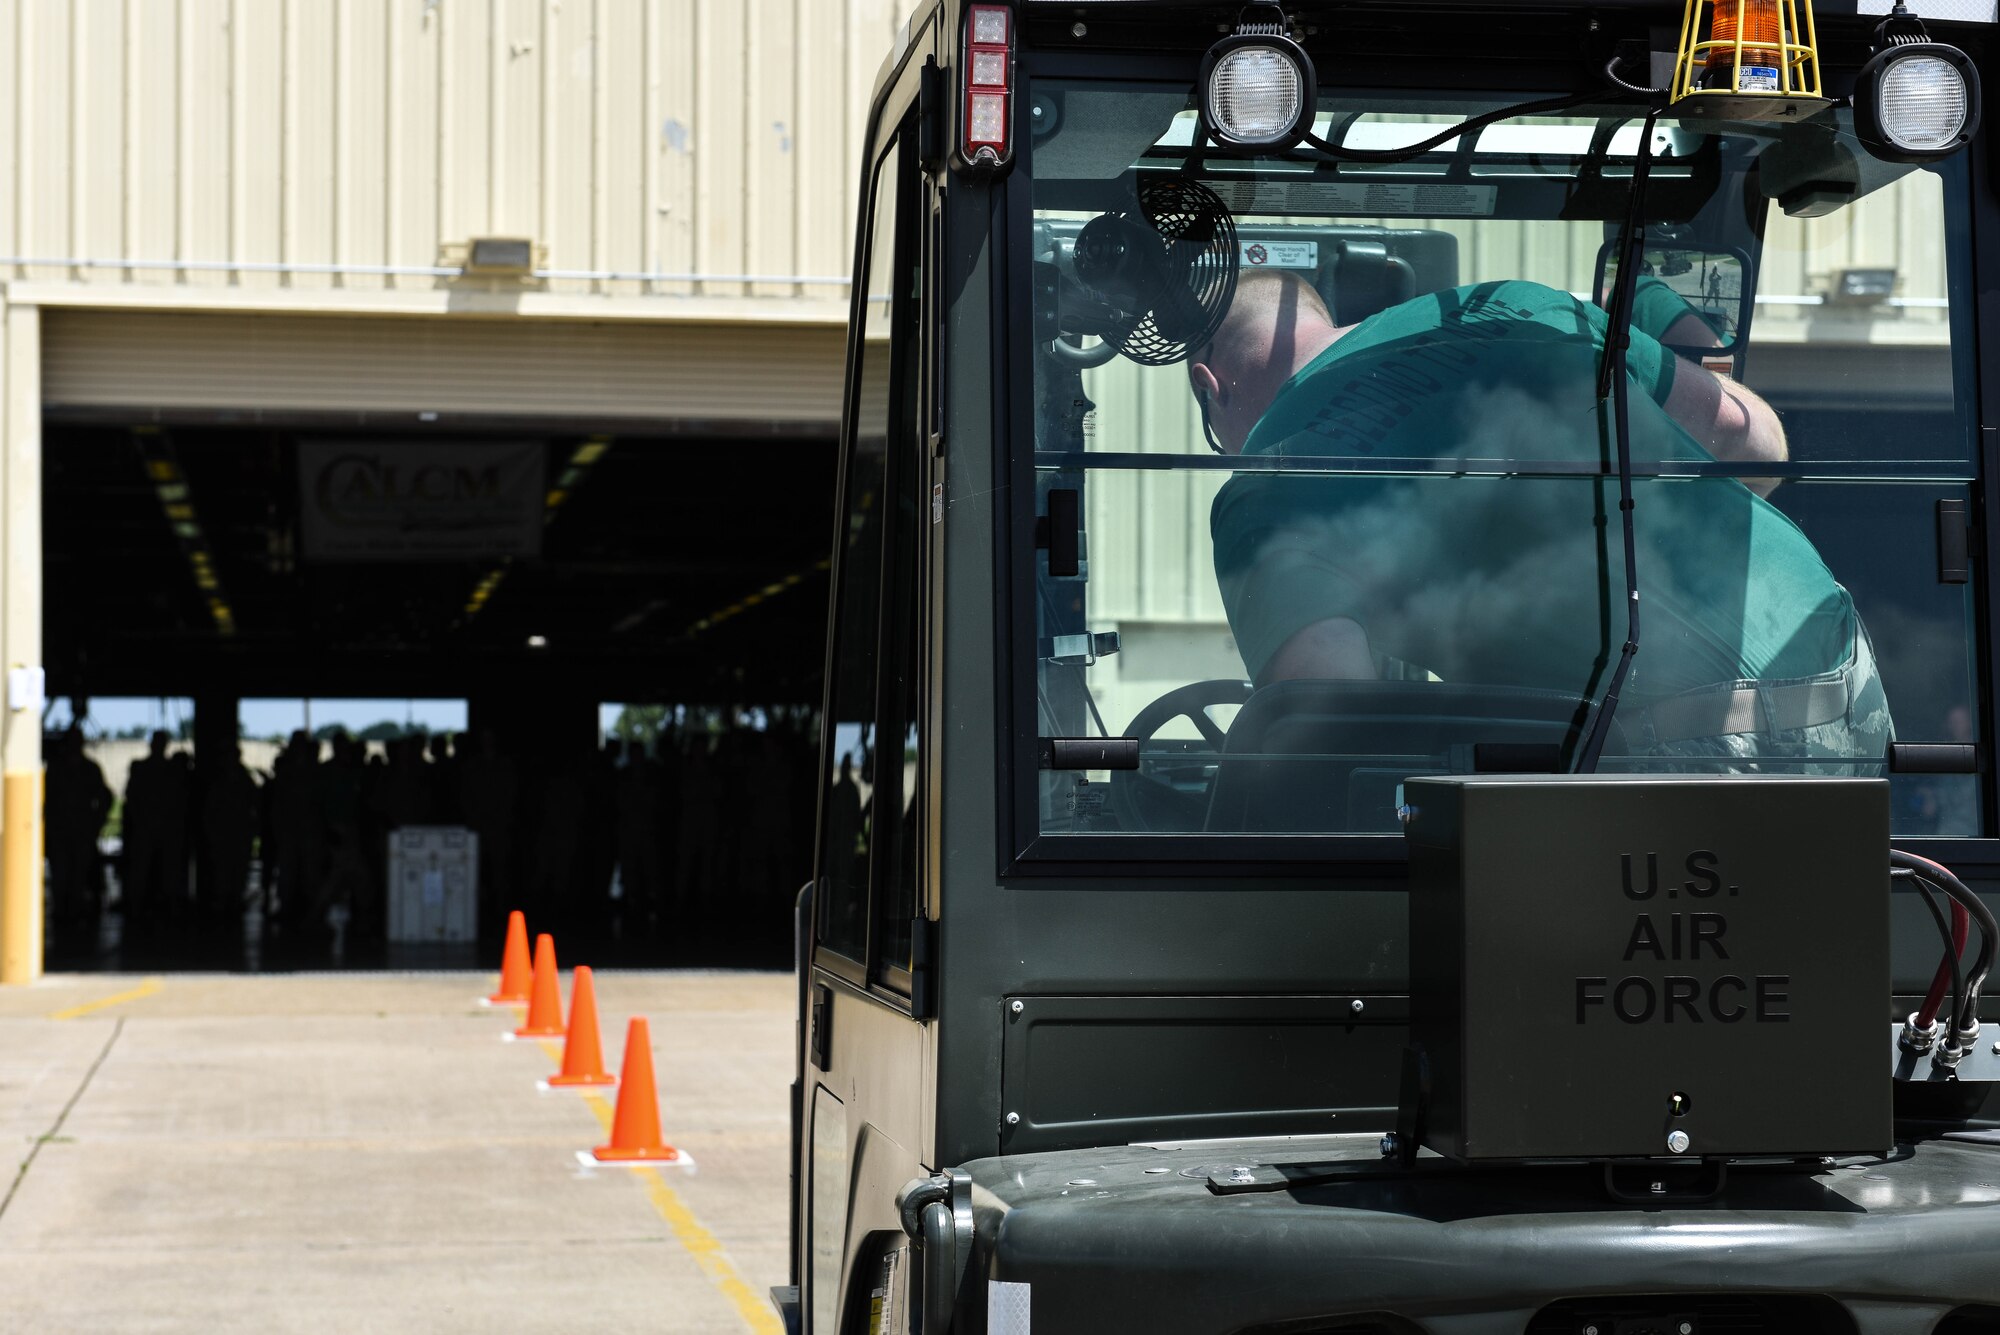 Staff Sgt. Joseph Travers, assigned to the 2nd Munitions, climbs into a forklift in preparation for one of four events in the Air Force Global Strike Challenge on Barksdale Air Force Base, La., June 12, 2017. Travers needed to drive between the cones, pick up a package and drive between the cones once more before dropping the package off at its final destination. (U.S. Air Force Photo/Airman 1st Class Sydney Bennett)